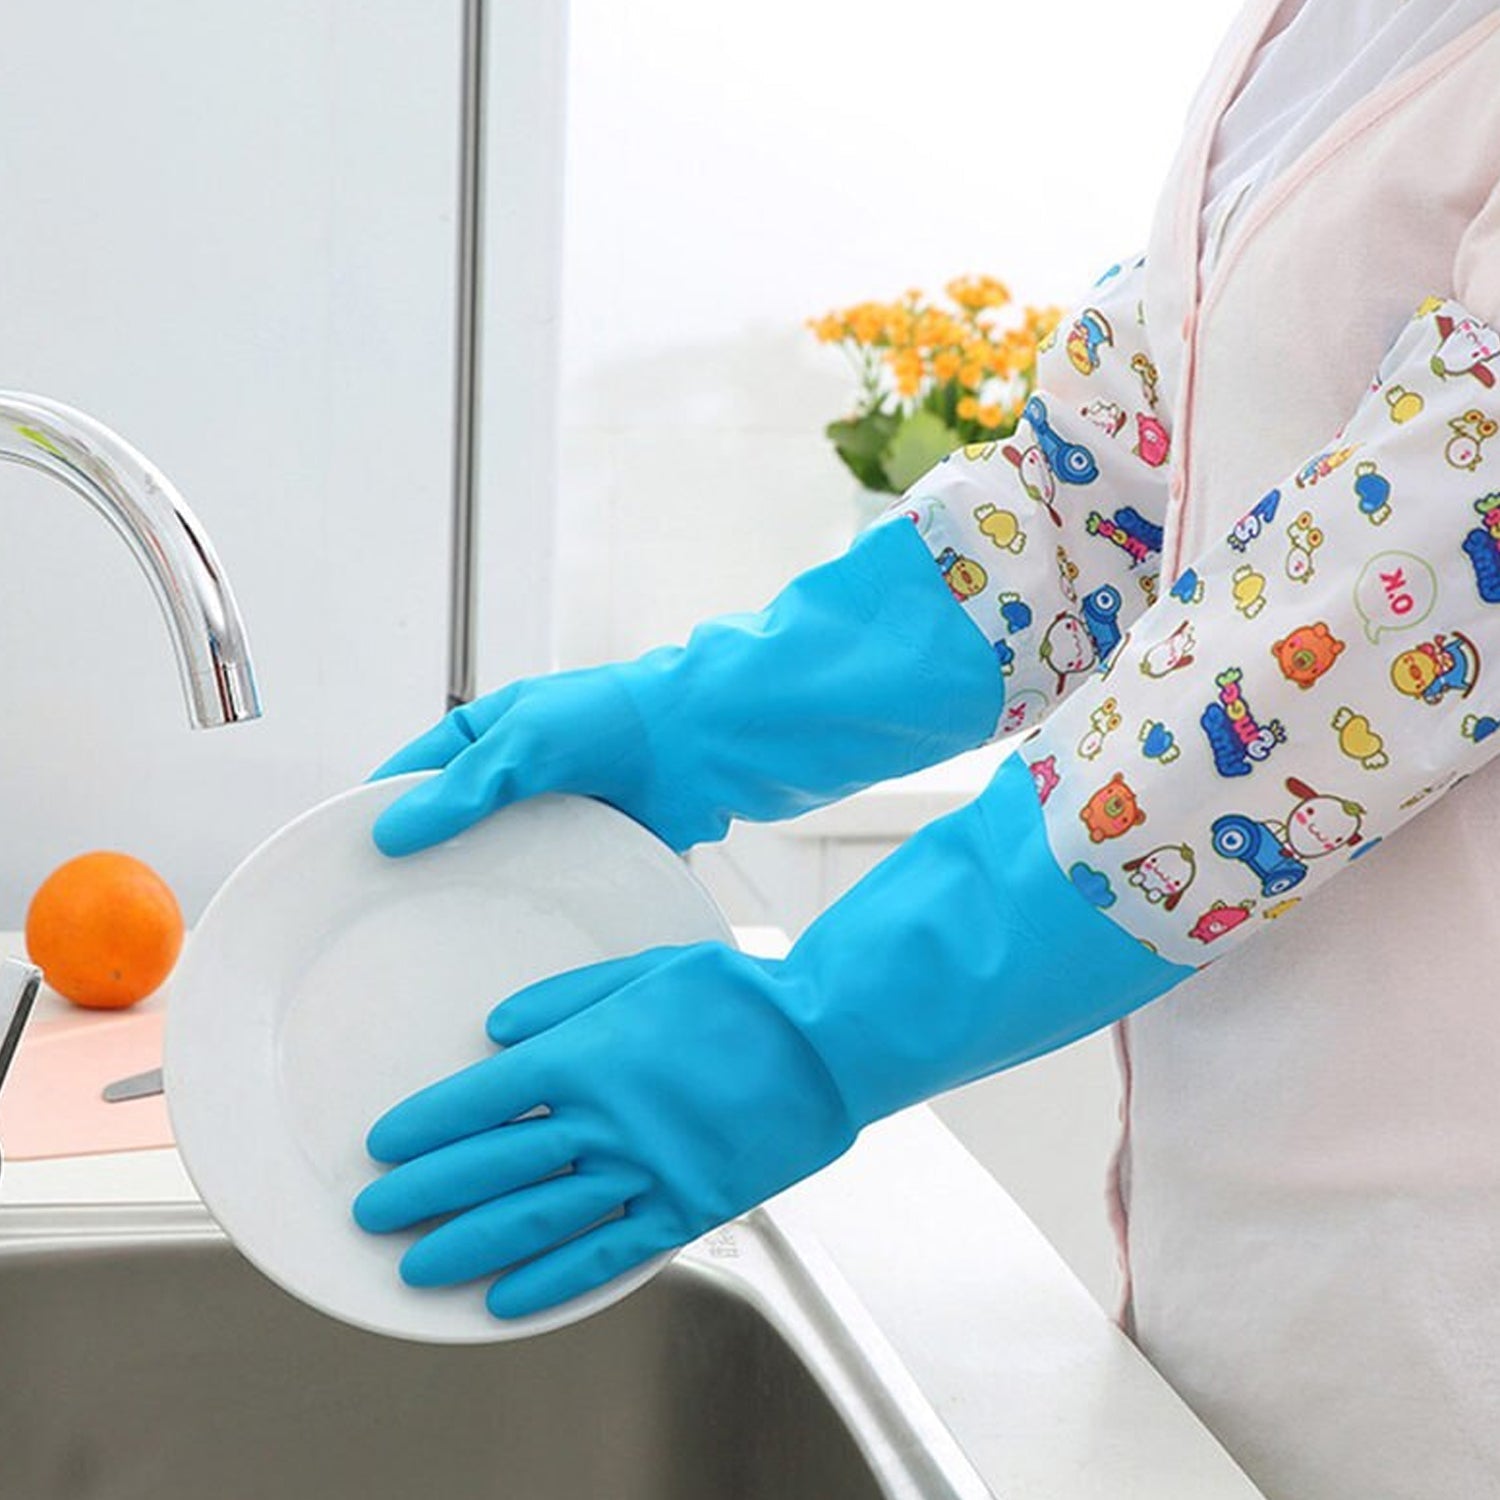 4855 2 Pair Large Blue Gloves For Different Types Of Purposes Like Washing Utensils, Gardening And Cleaning Toilet Etc. Dukandaily